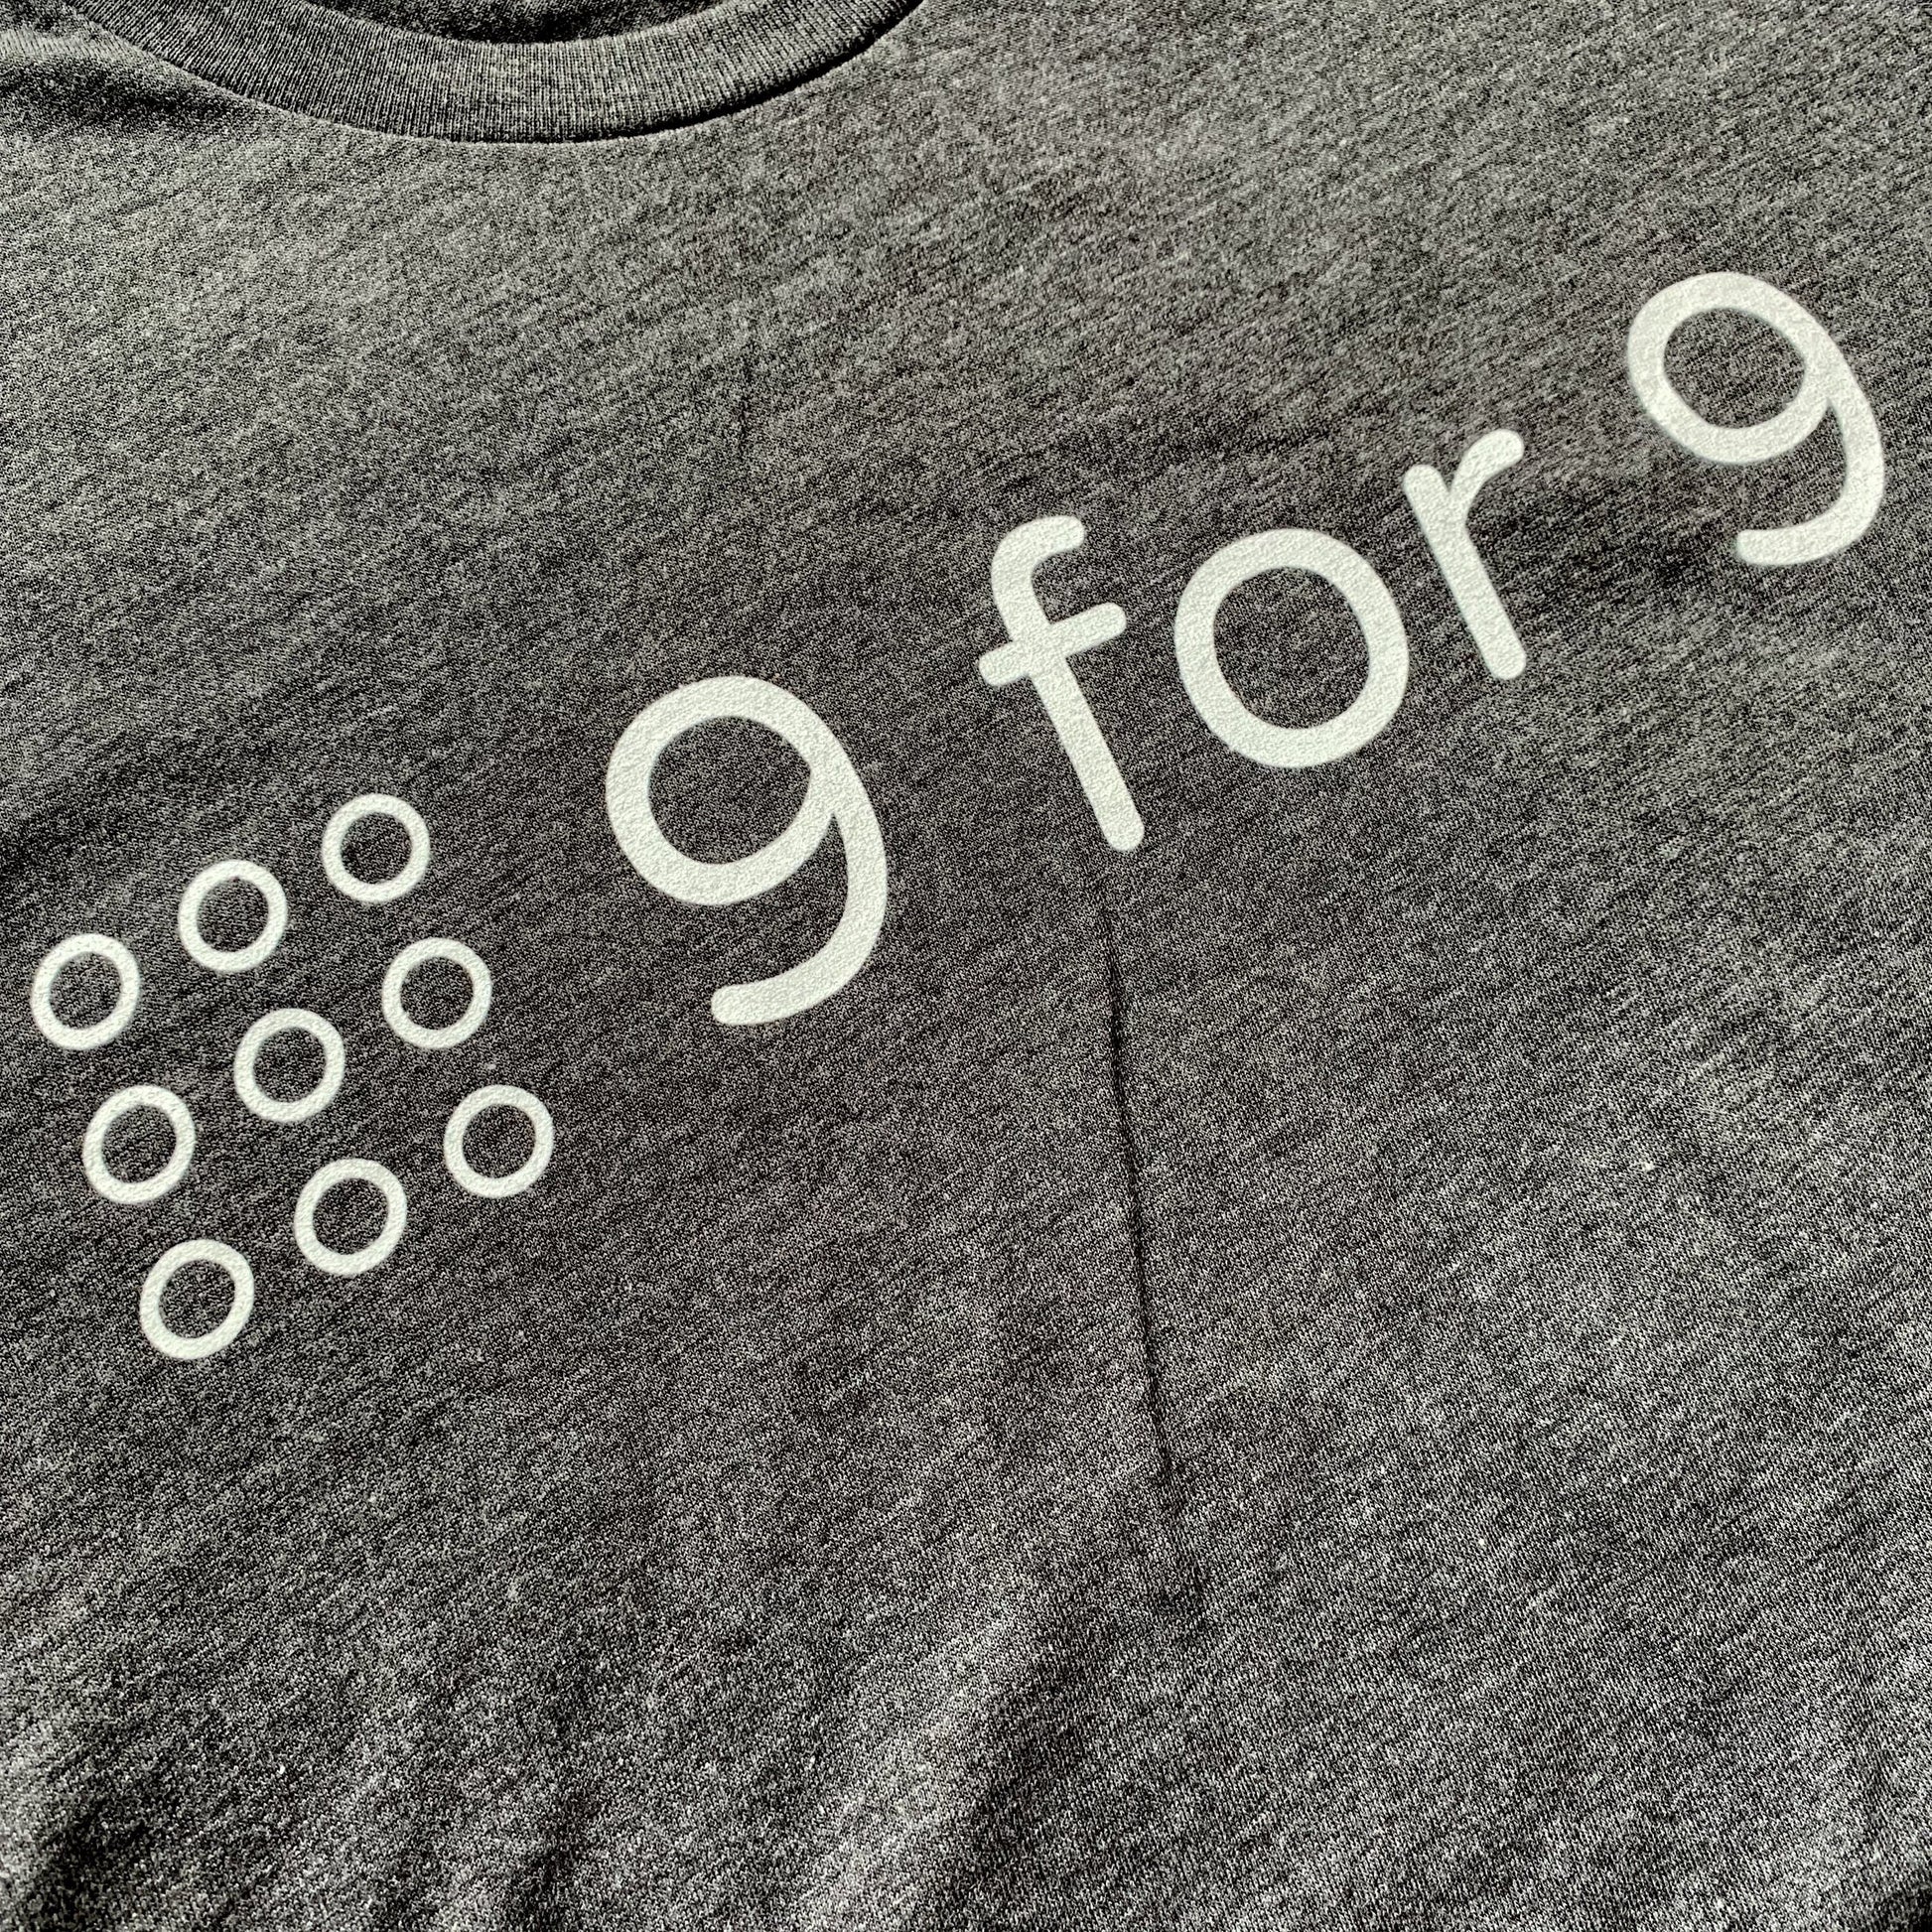 9 for 9 Unisex Tee (Heather Charcoal) - 9 for 9